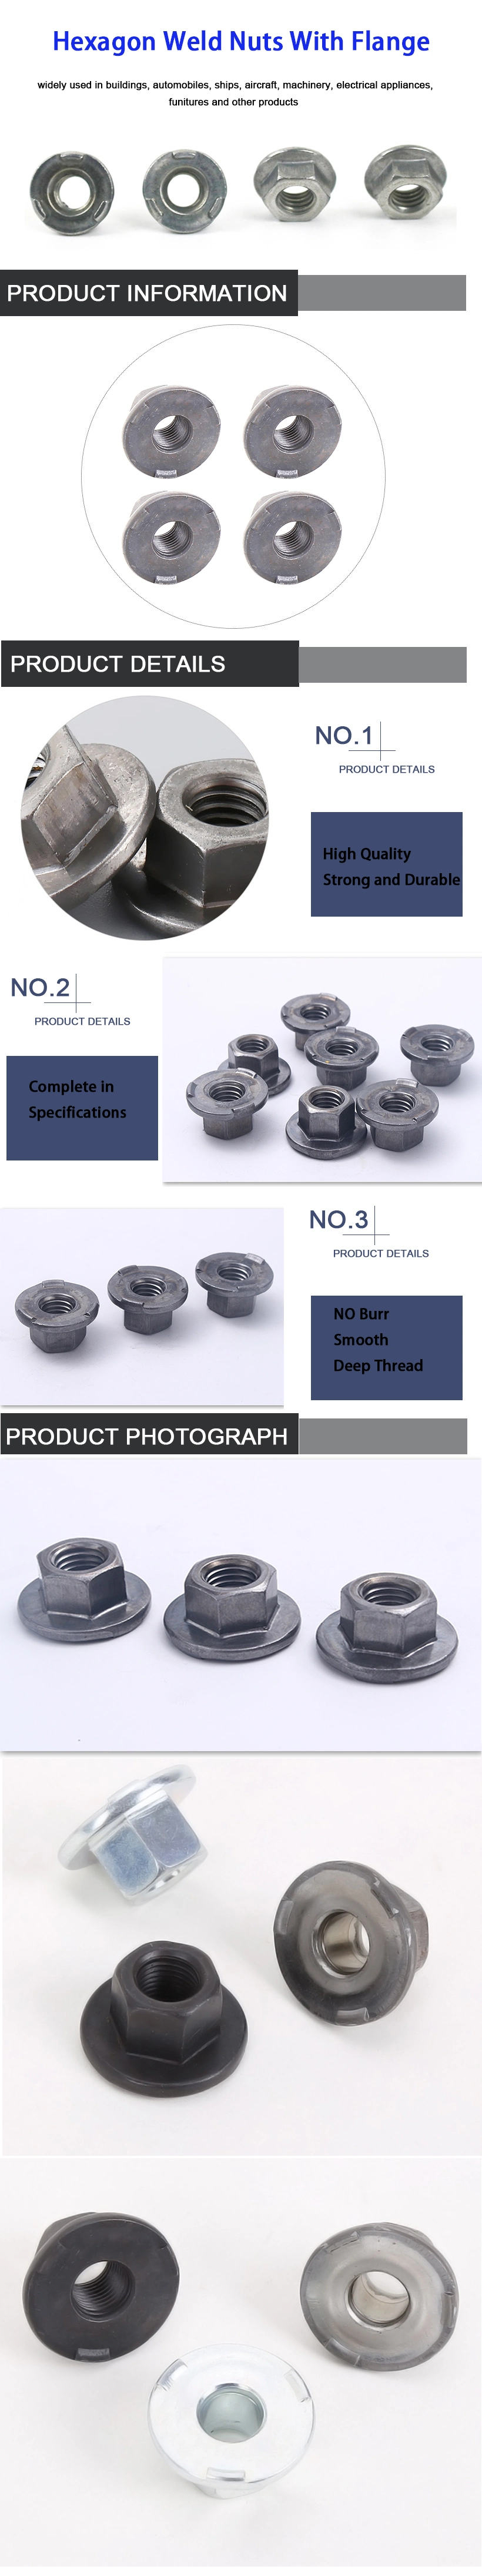 Made in China Carbon Steel Black Oxide M5-M16 Customized Hexagon Weld Nut Step Nut Steel Nut Lock Nut Rivet Nut Thick Nut Flange Nut for Building